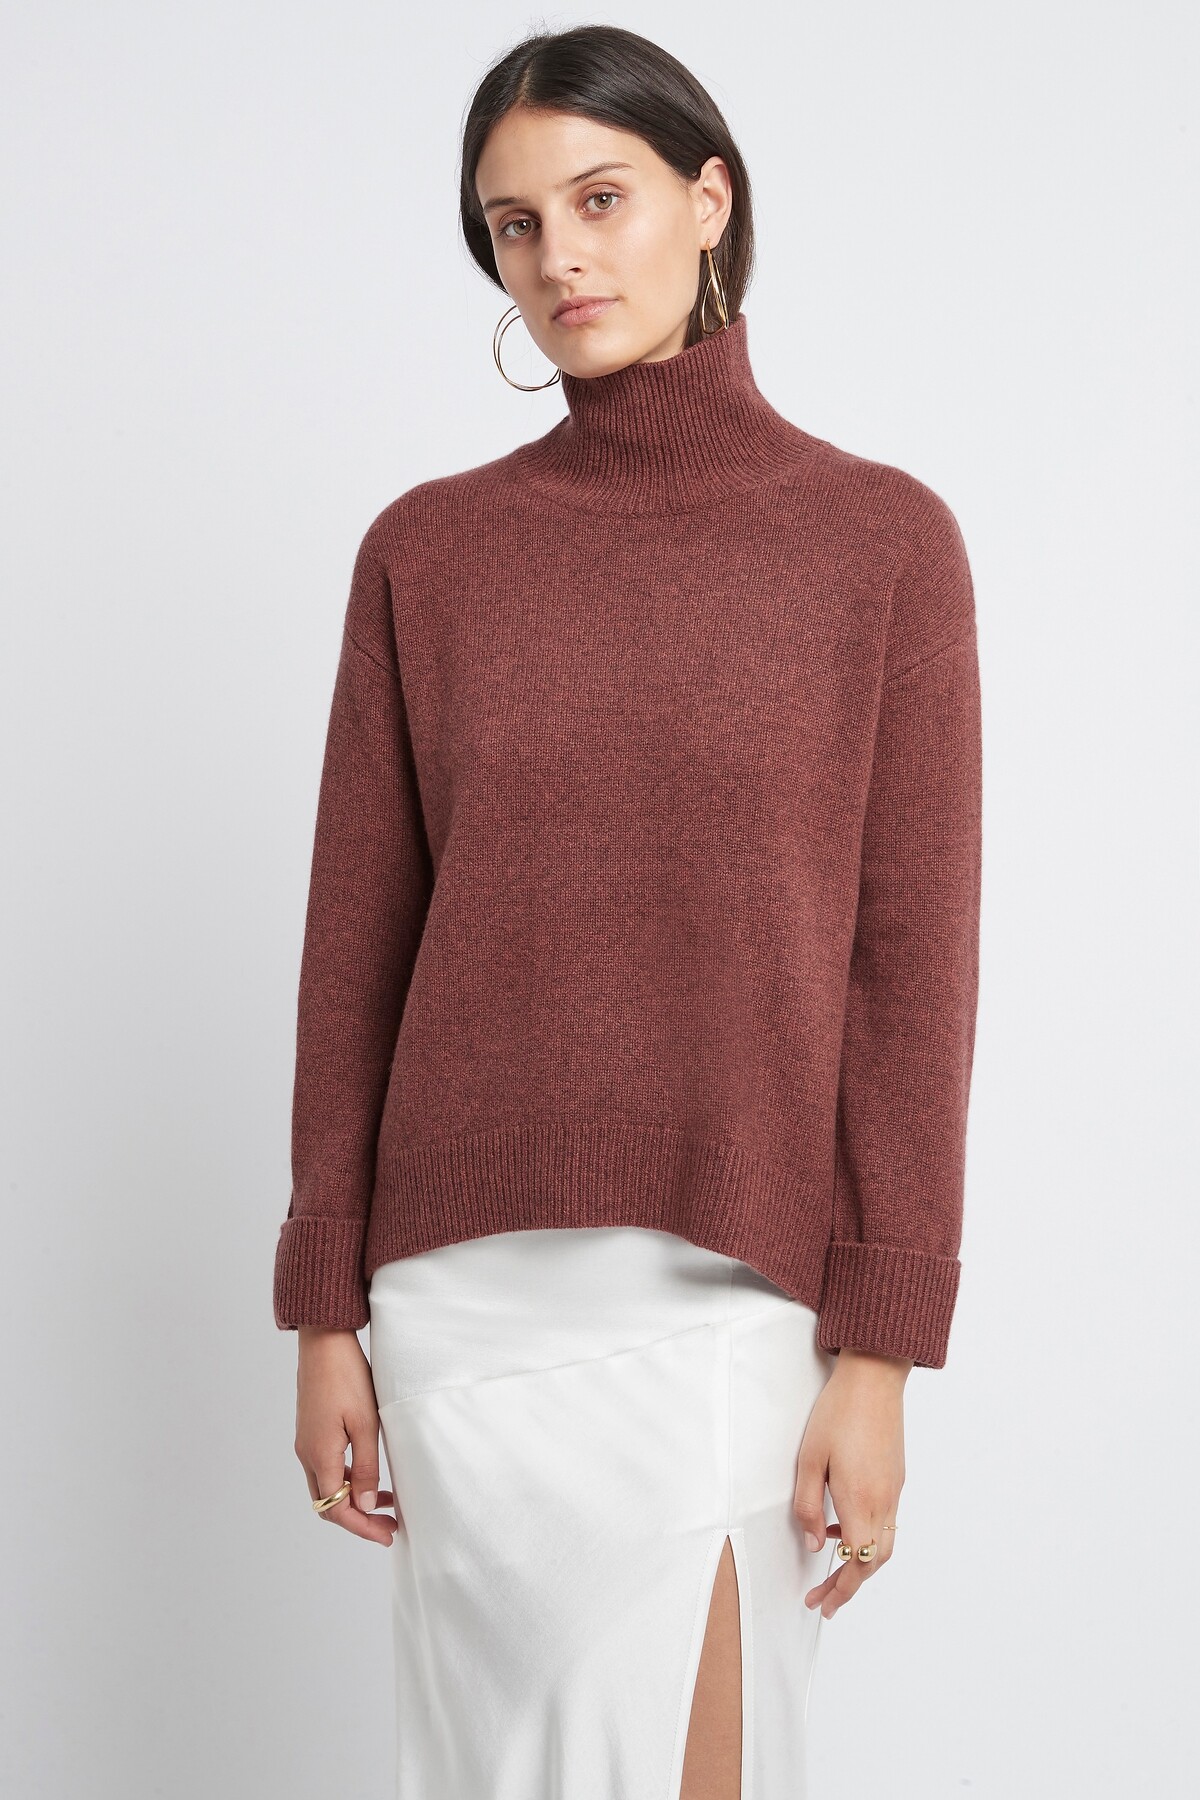 CLEO CASHMERE SWEATER (VINTAGE ROSE)- H BRAND X THERON WINTER 21 Boxing ...